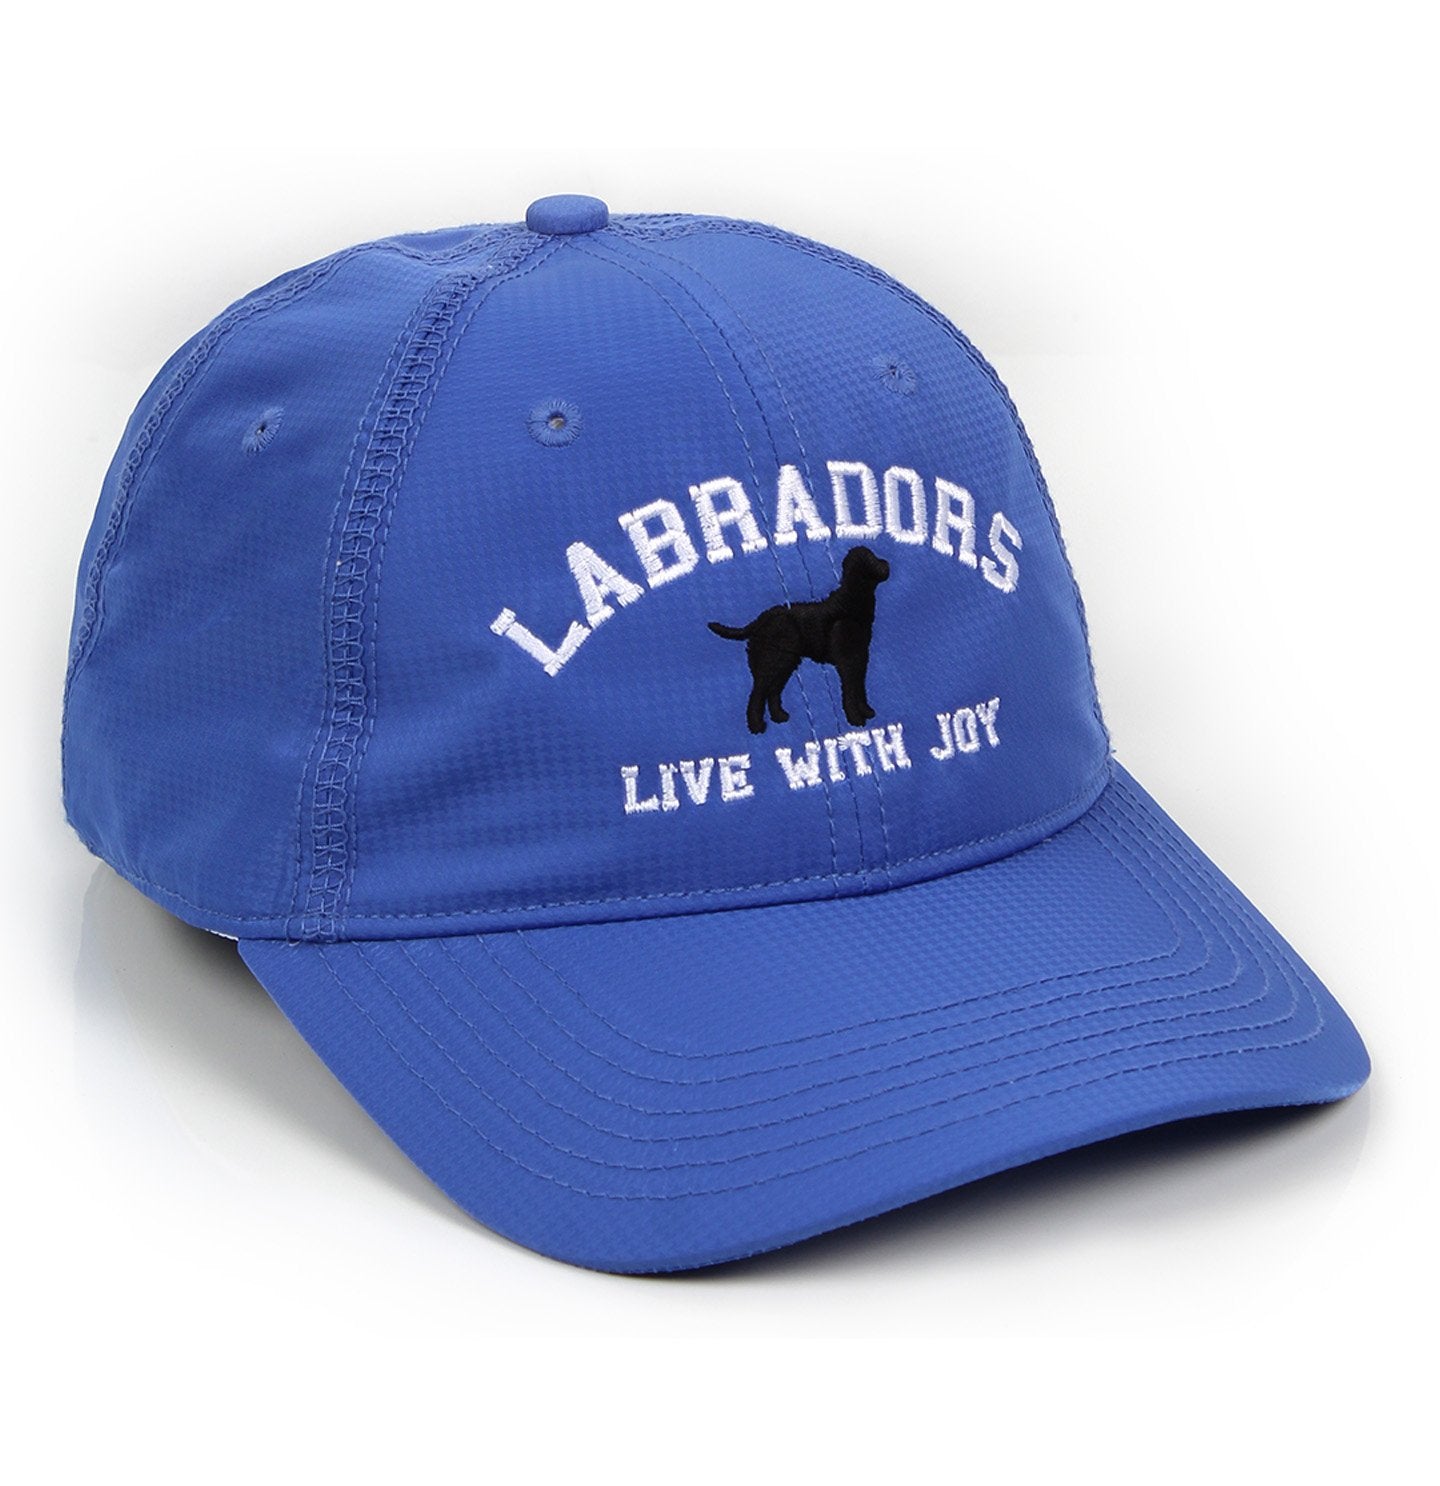 Labradors.com - Labradors Live With Joy (On Blue) - Ladies Polyester Houndstooth Hat